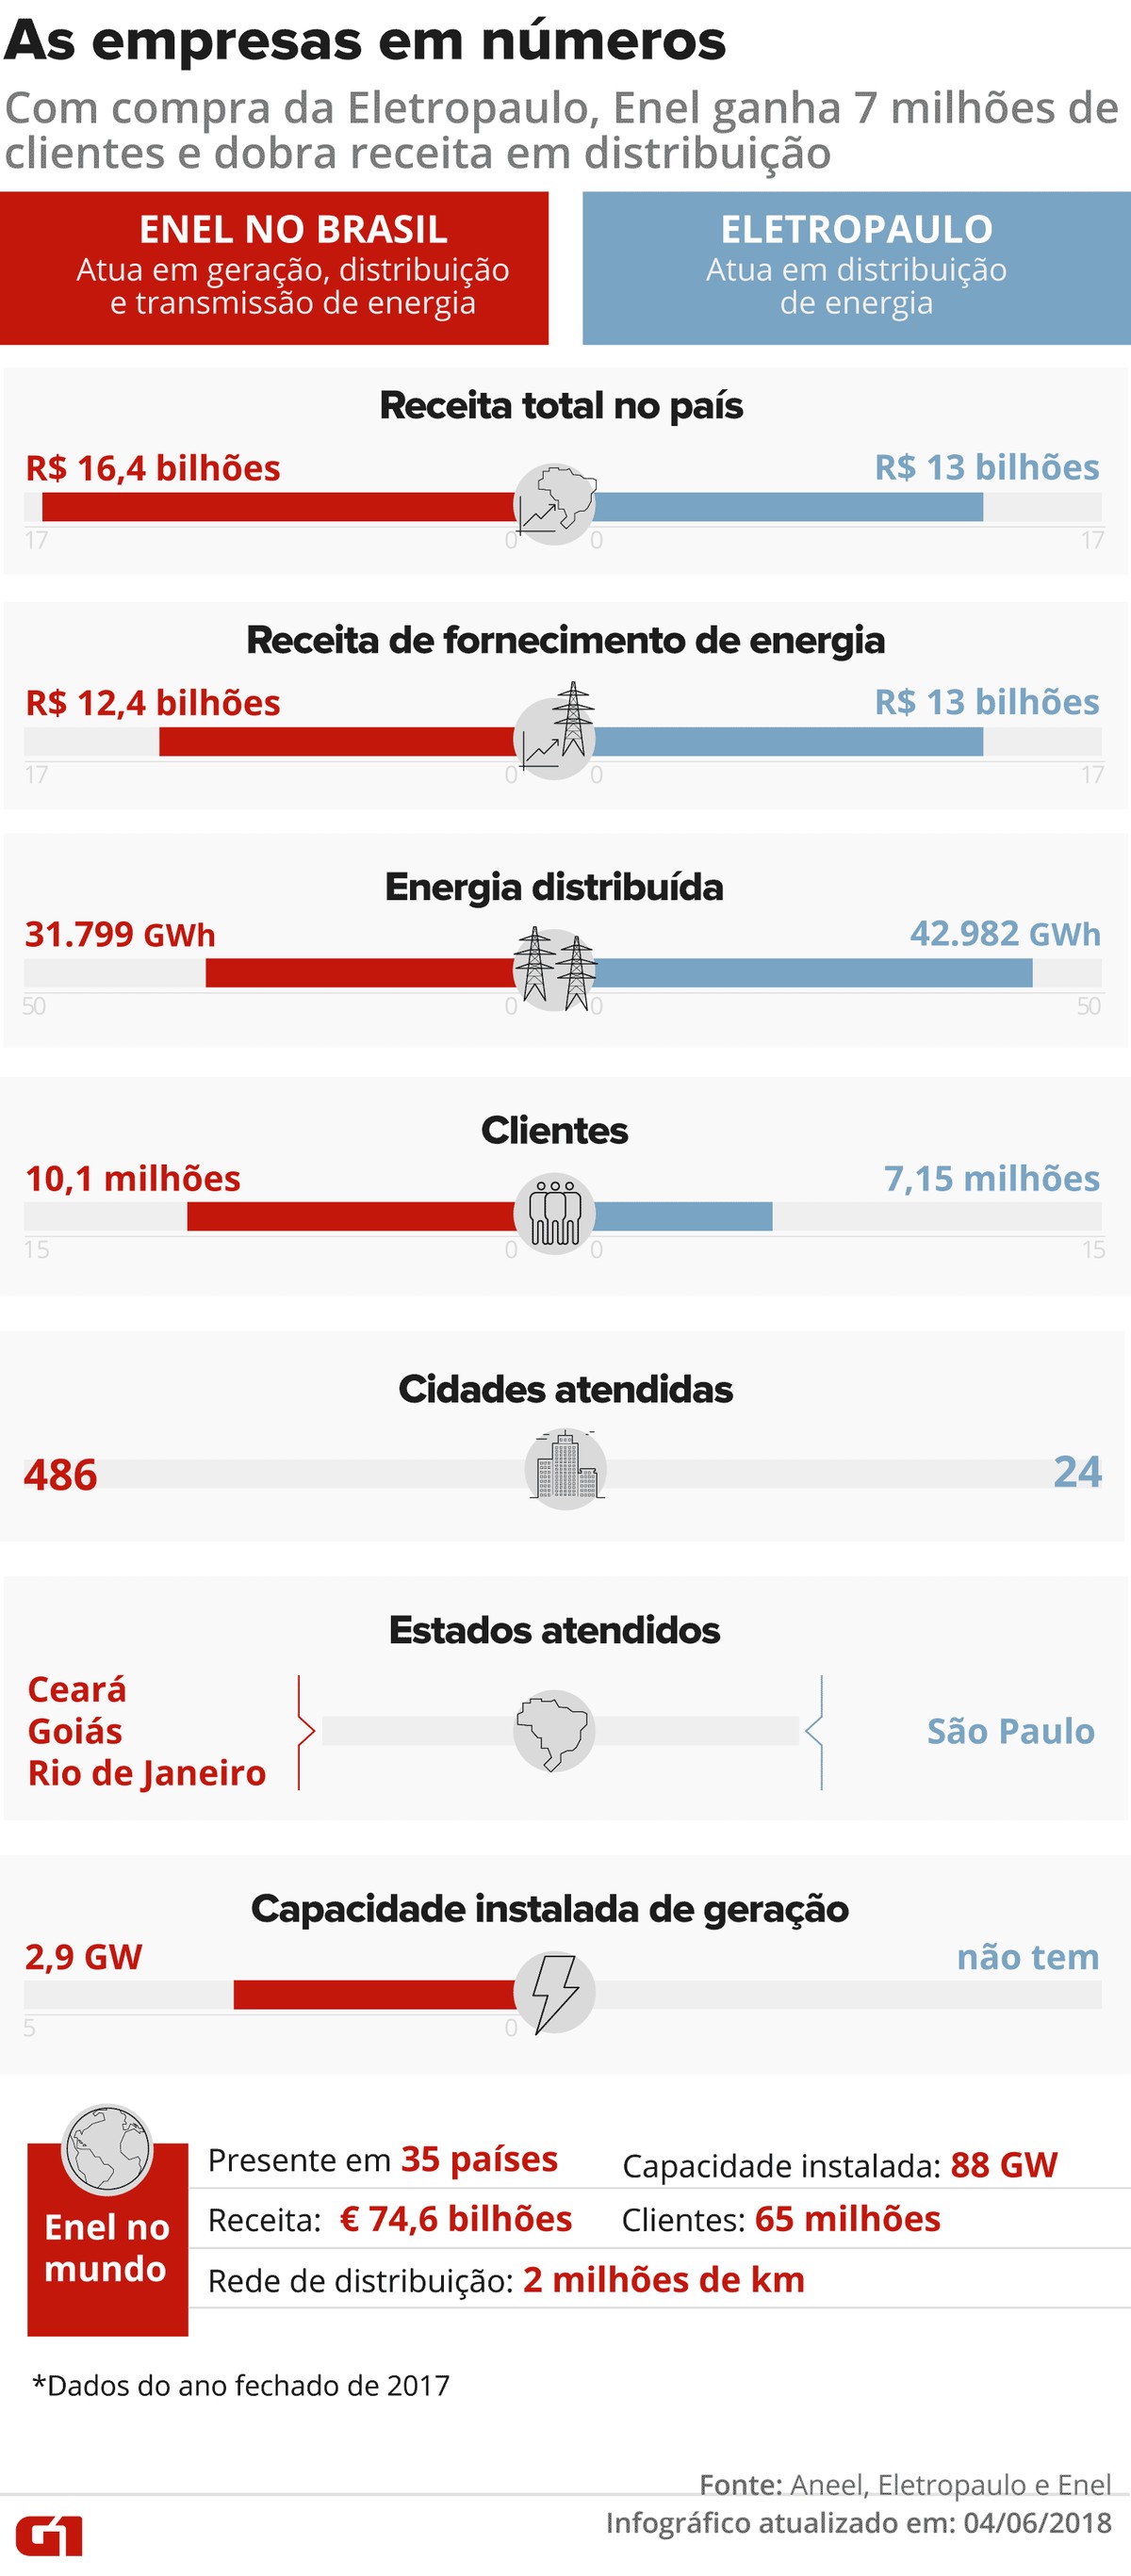 SÃO PAULO, SP - 04.12.2018: GRUPO ITALIANO COMPRA ELETROPAULO - Italian  group Enel closed in June the purchase of 73% of Eletropaulo that will be  renamed Enel Distribuição São Paulo. The changes